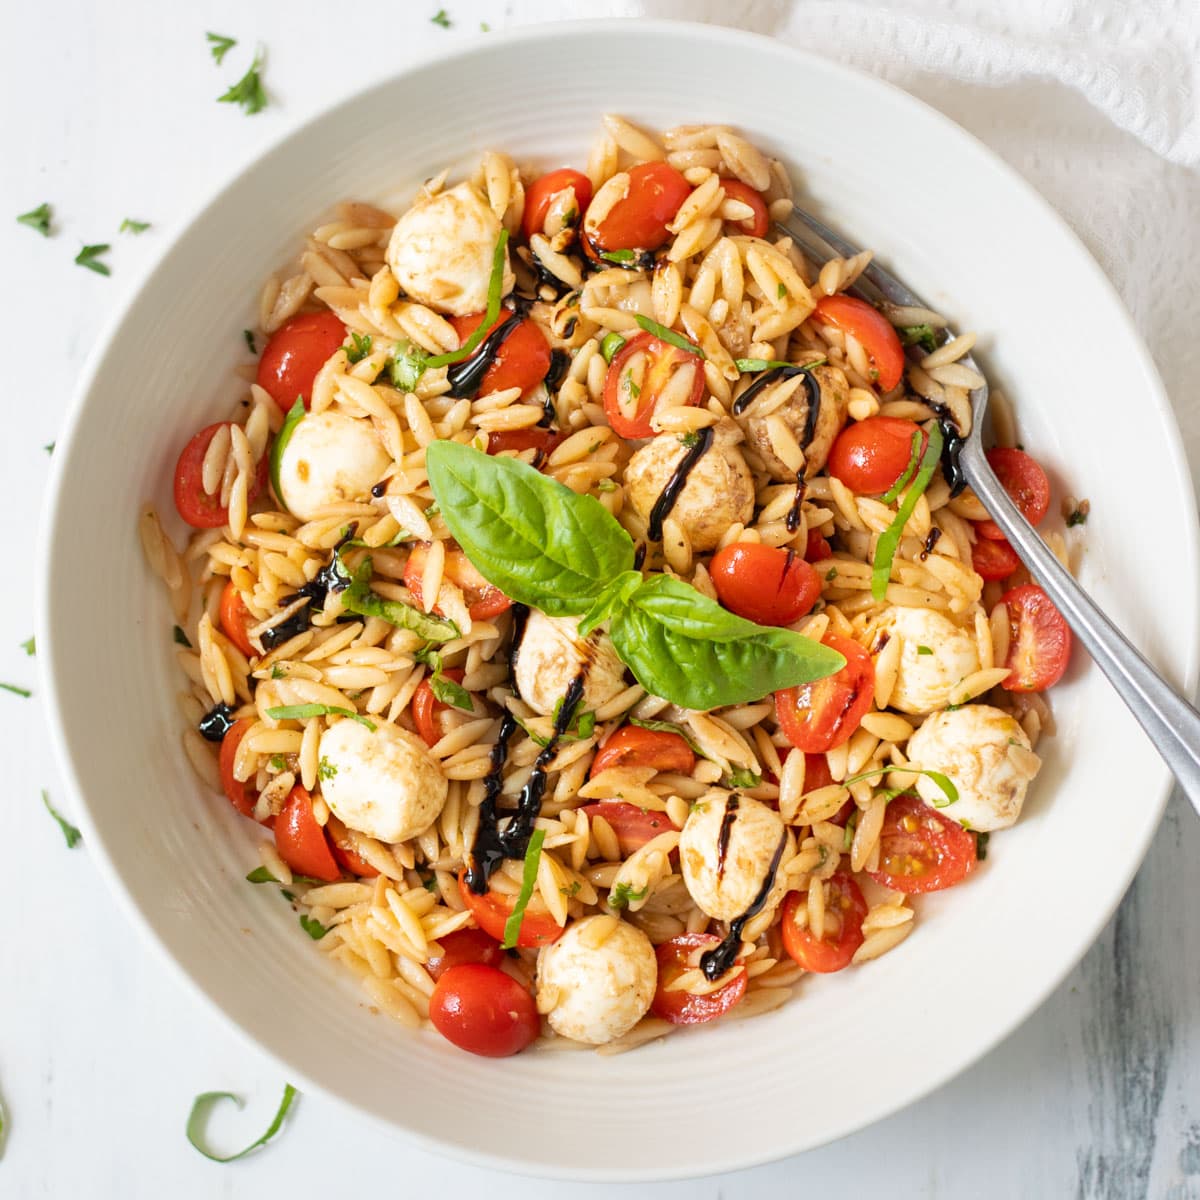 Caprese orzo pasta salad in a bowl garnished with basil leaves